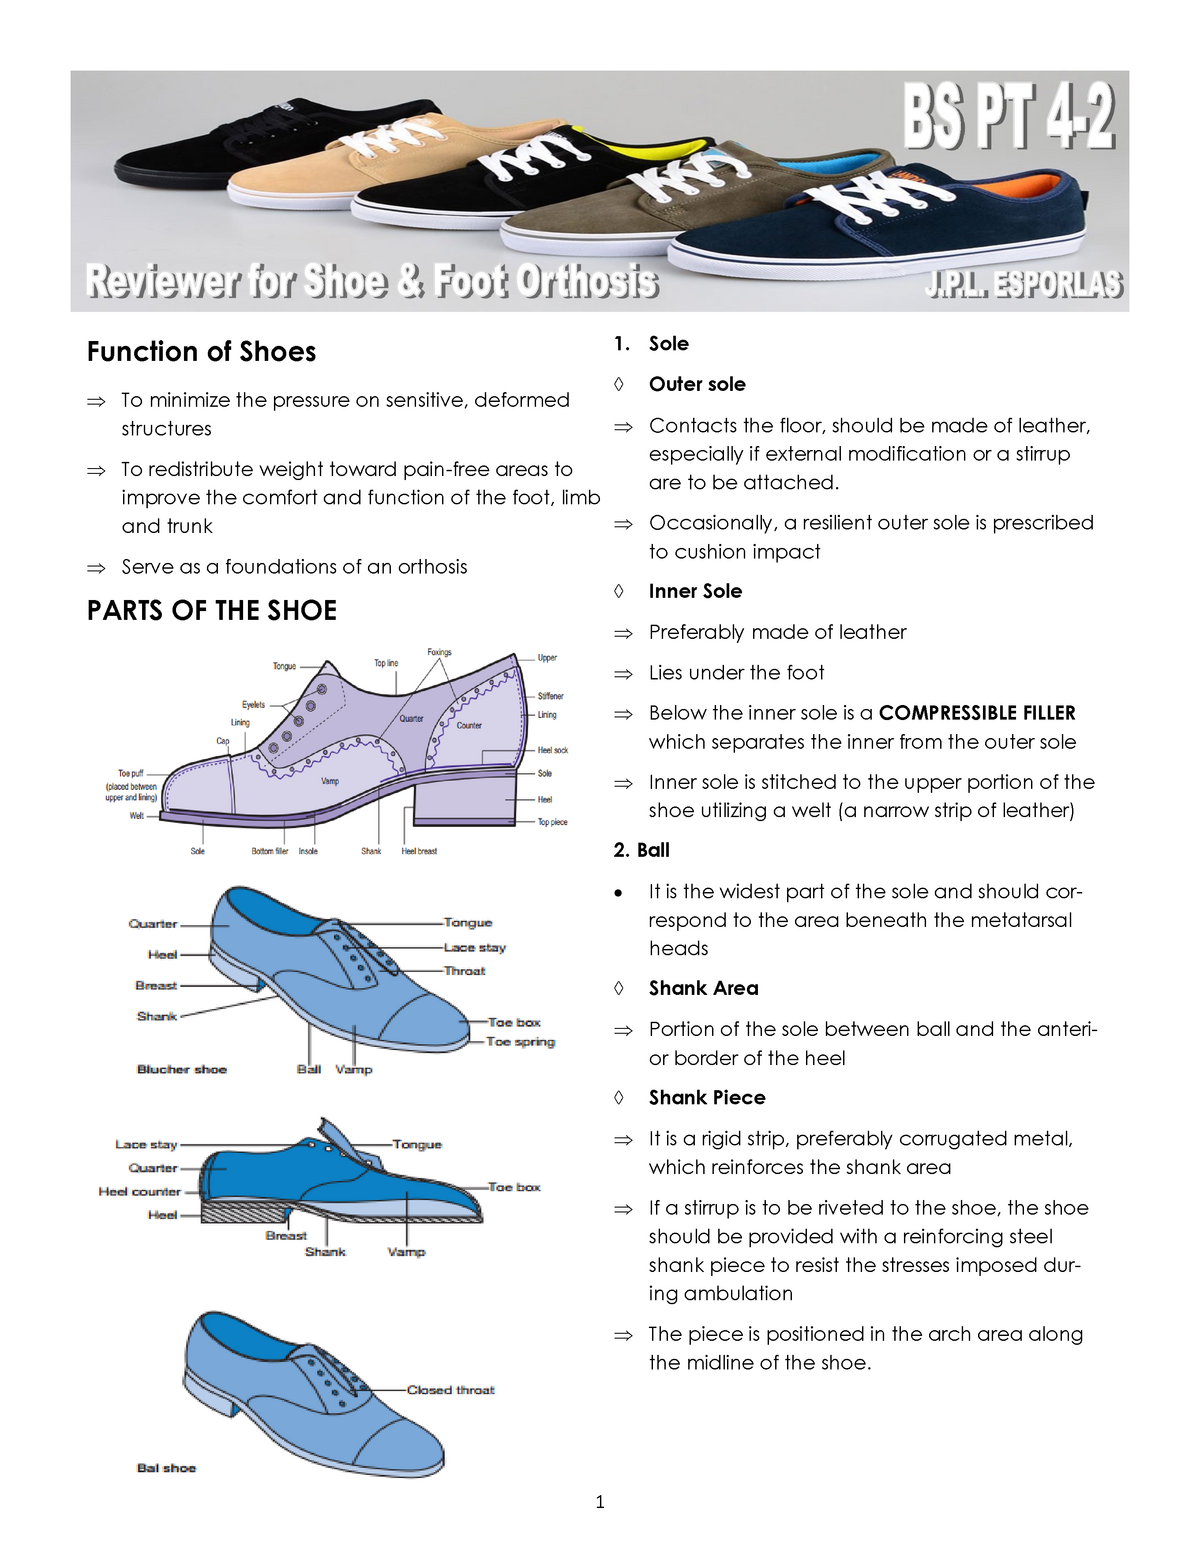 Reviewer for Footwear and Foot Orthosis - 1. Sole Function of Shoes To ...